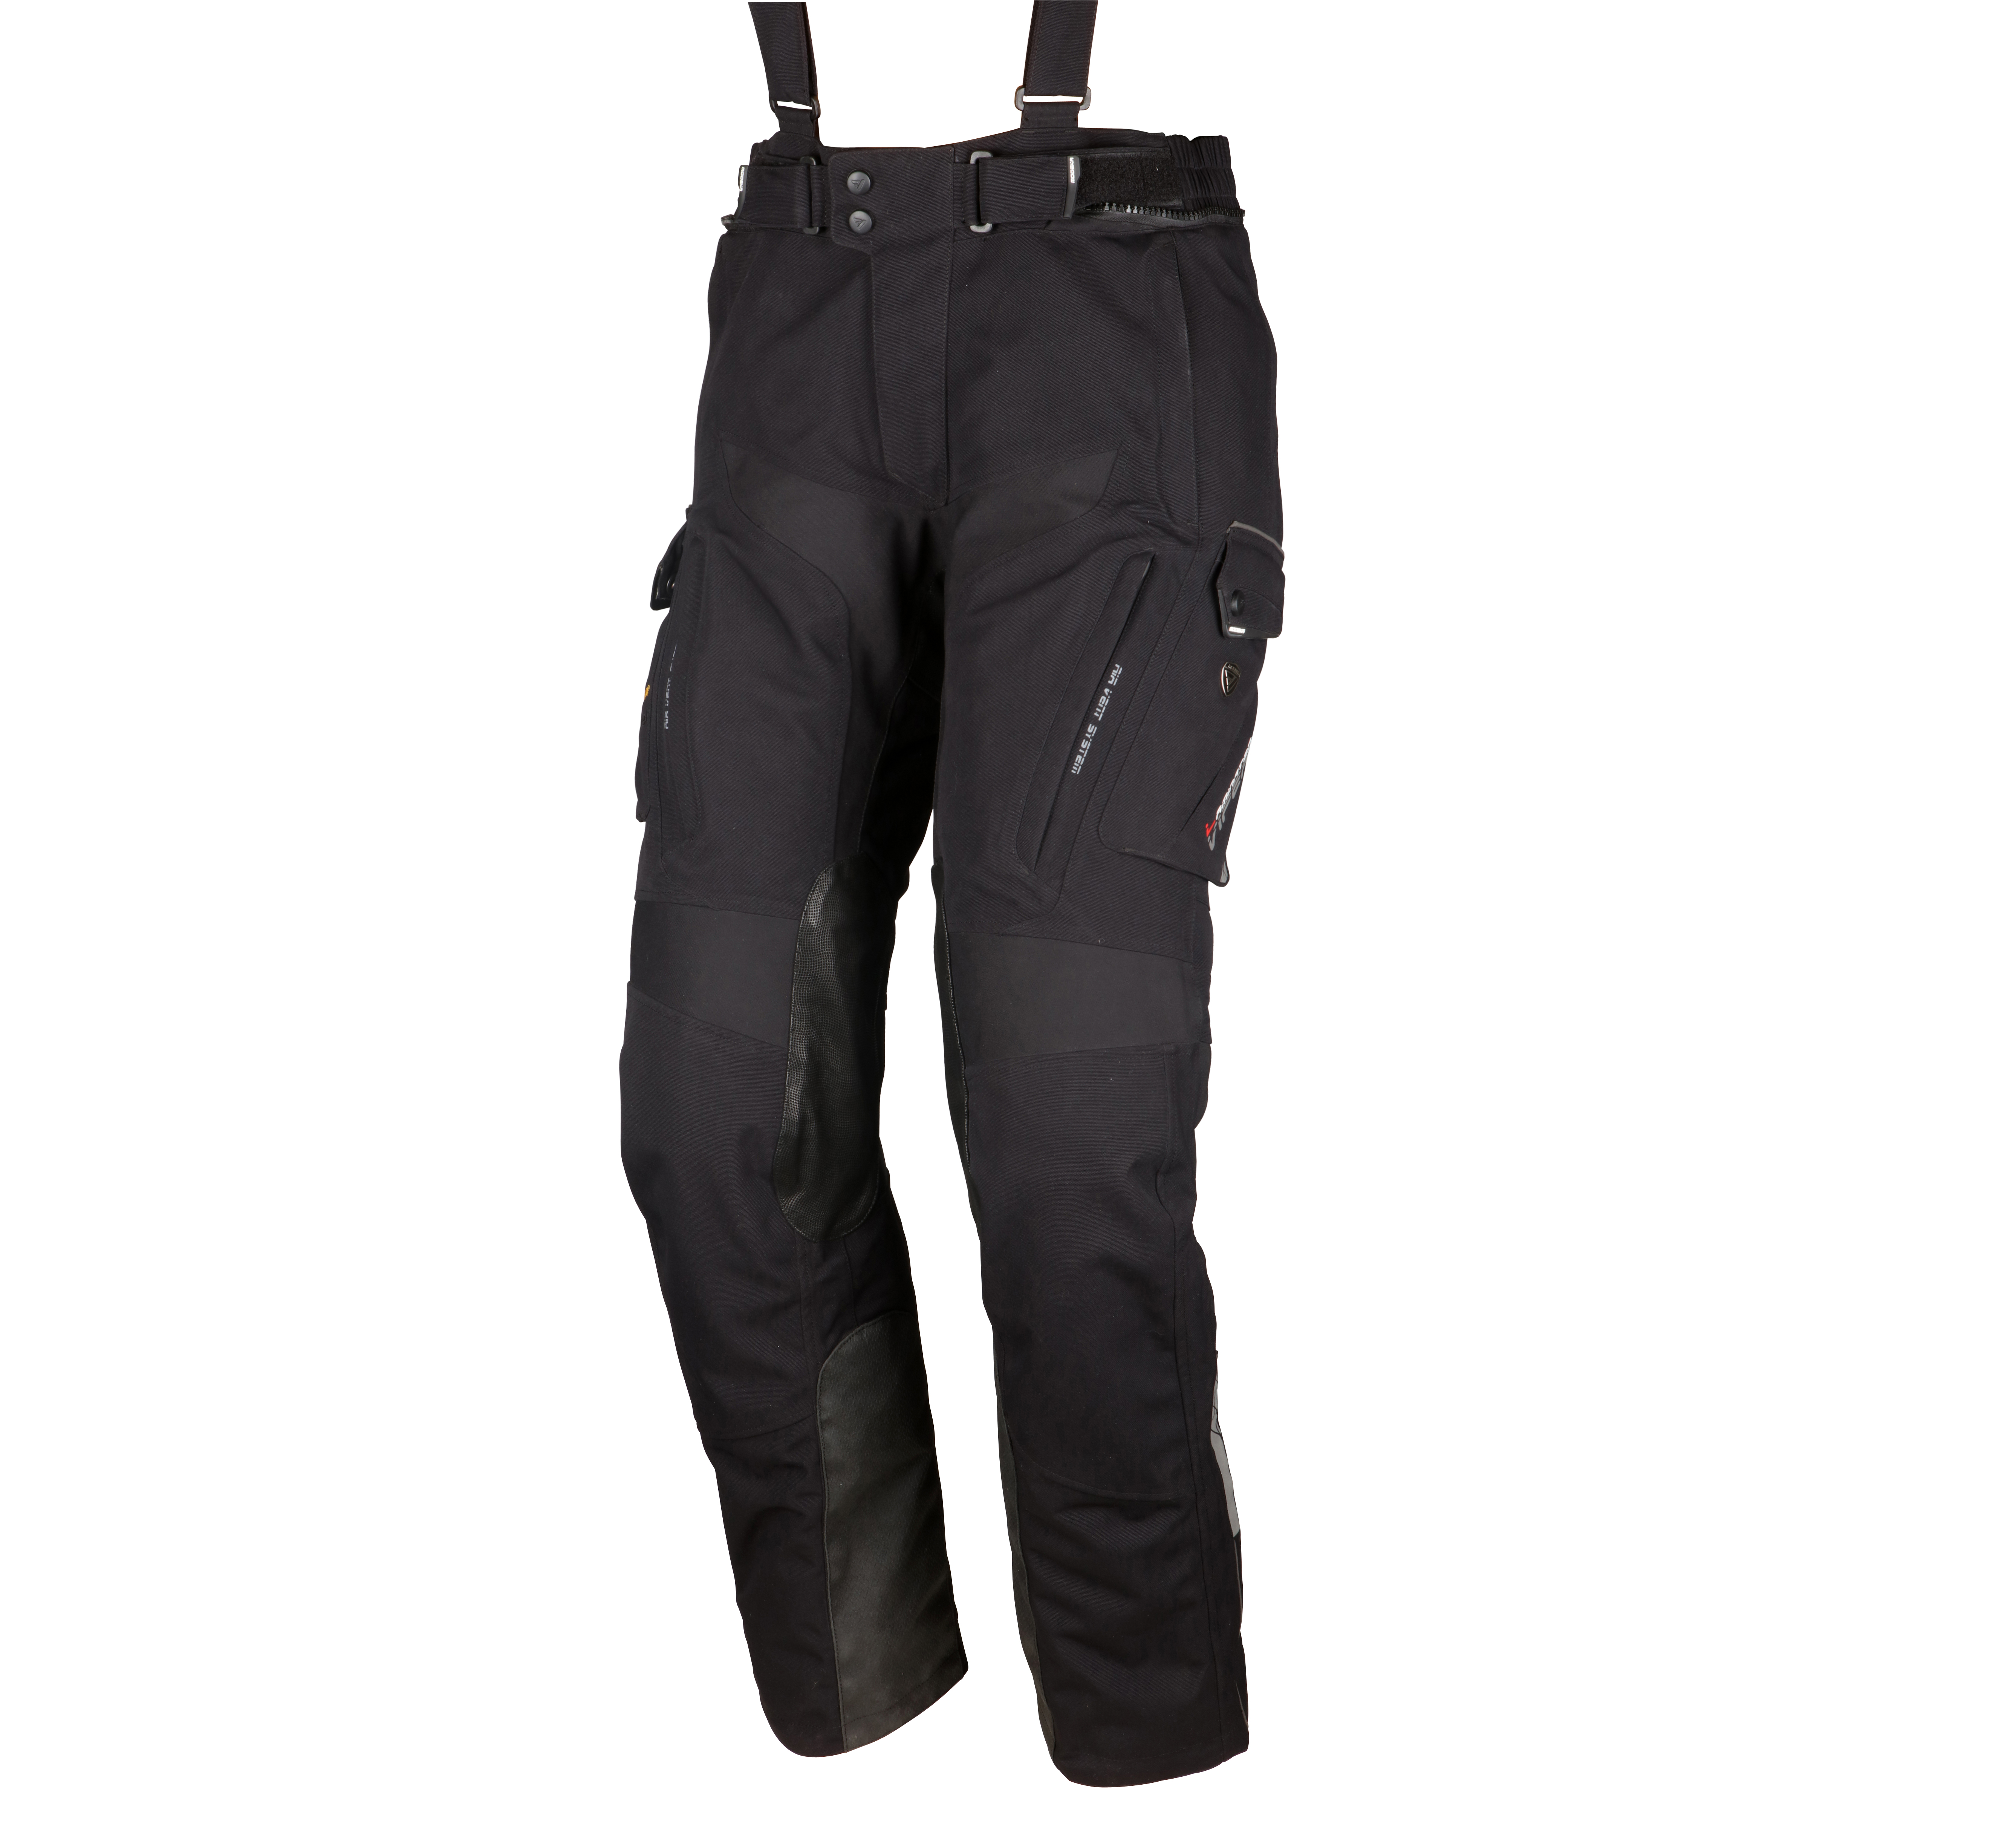 RST Pro Series AdventureX CE Trousers  Silver  Black  RST Motorcycle  Clothing  Free UK Delivery